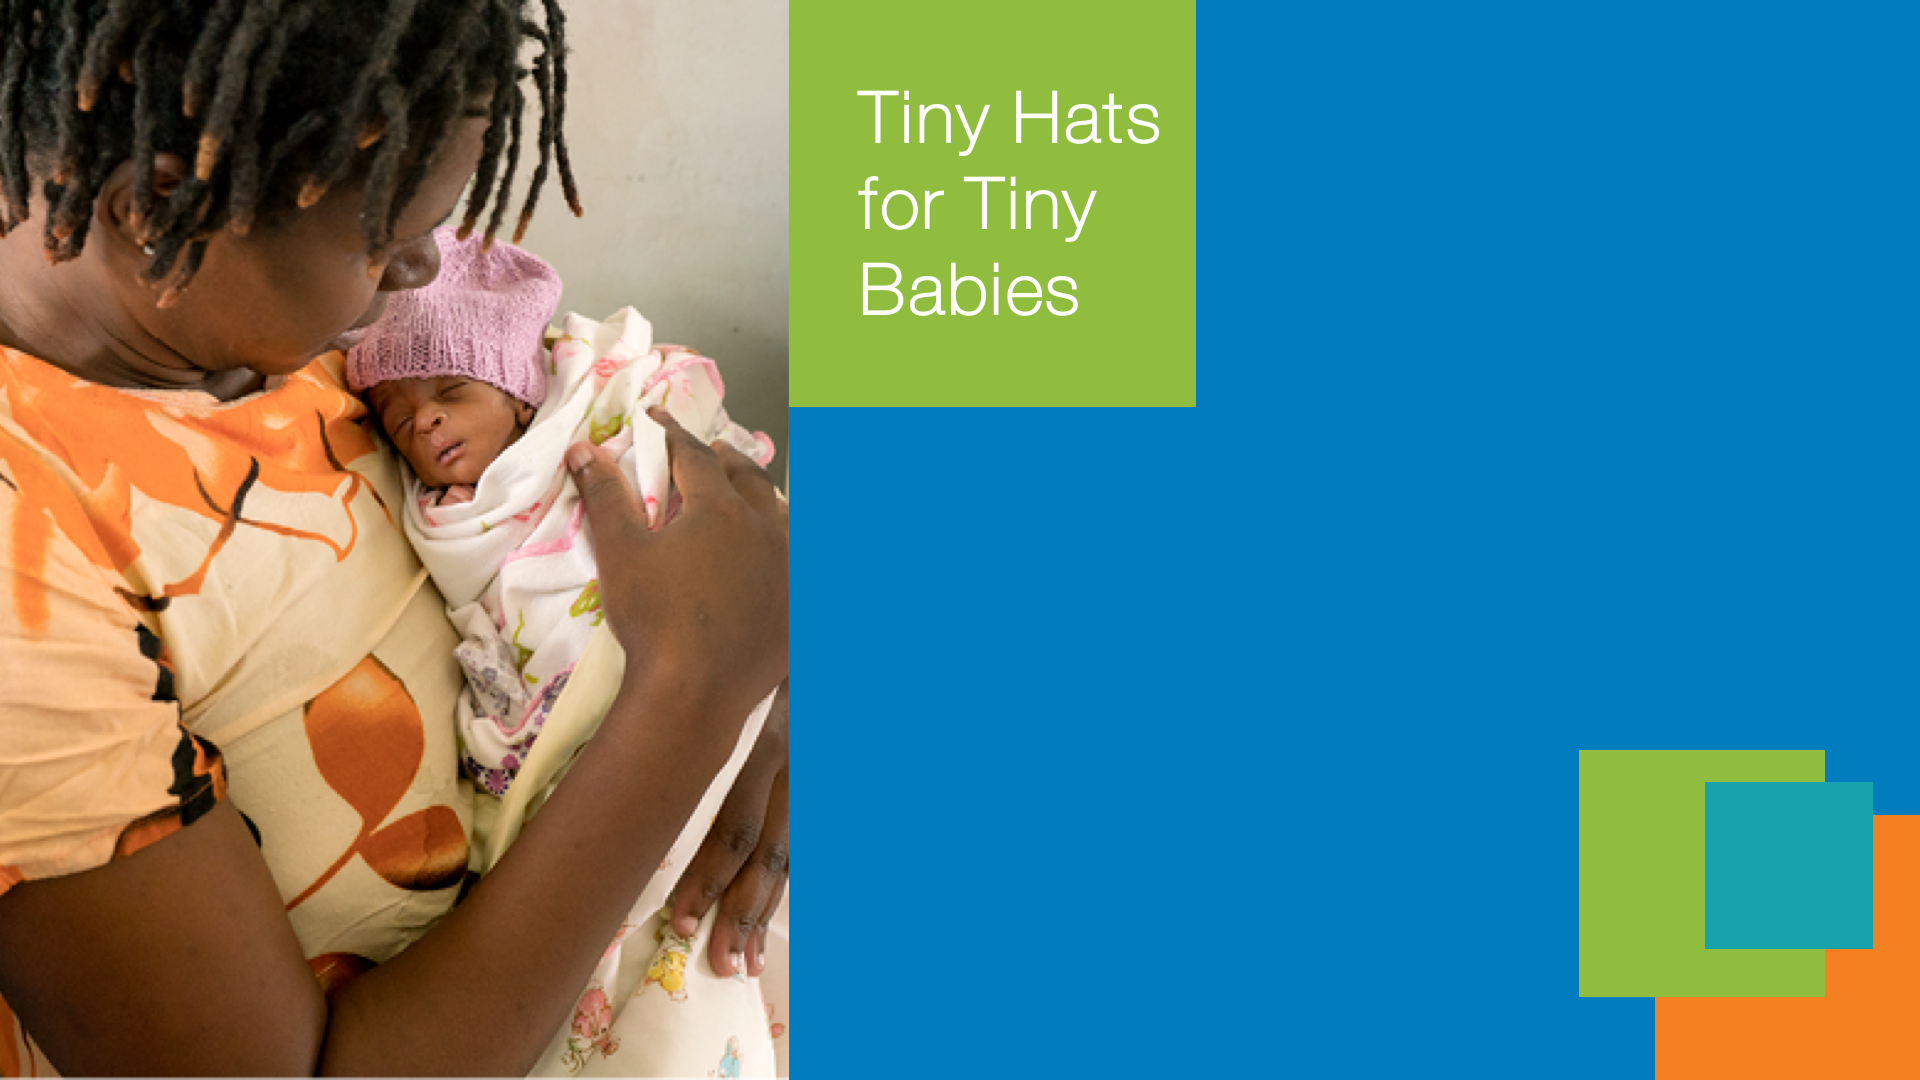 Tiny Hats for Tiny Babies  East Africa Preterm Birth Initiative